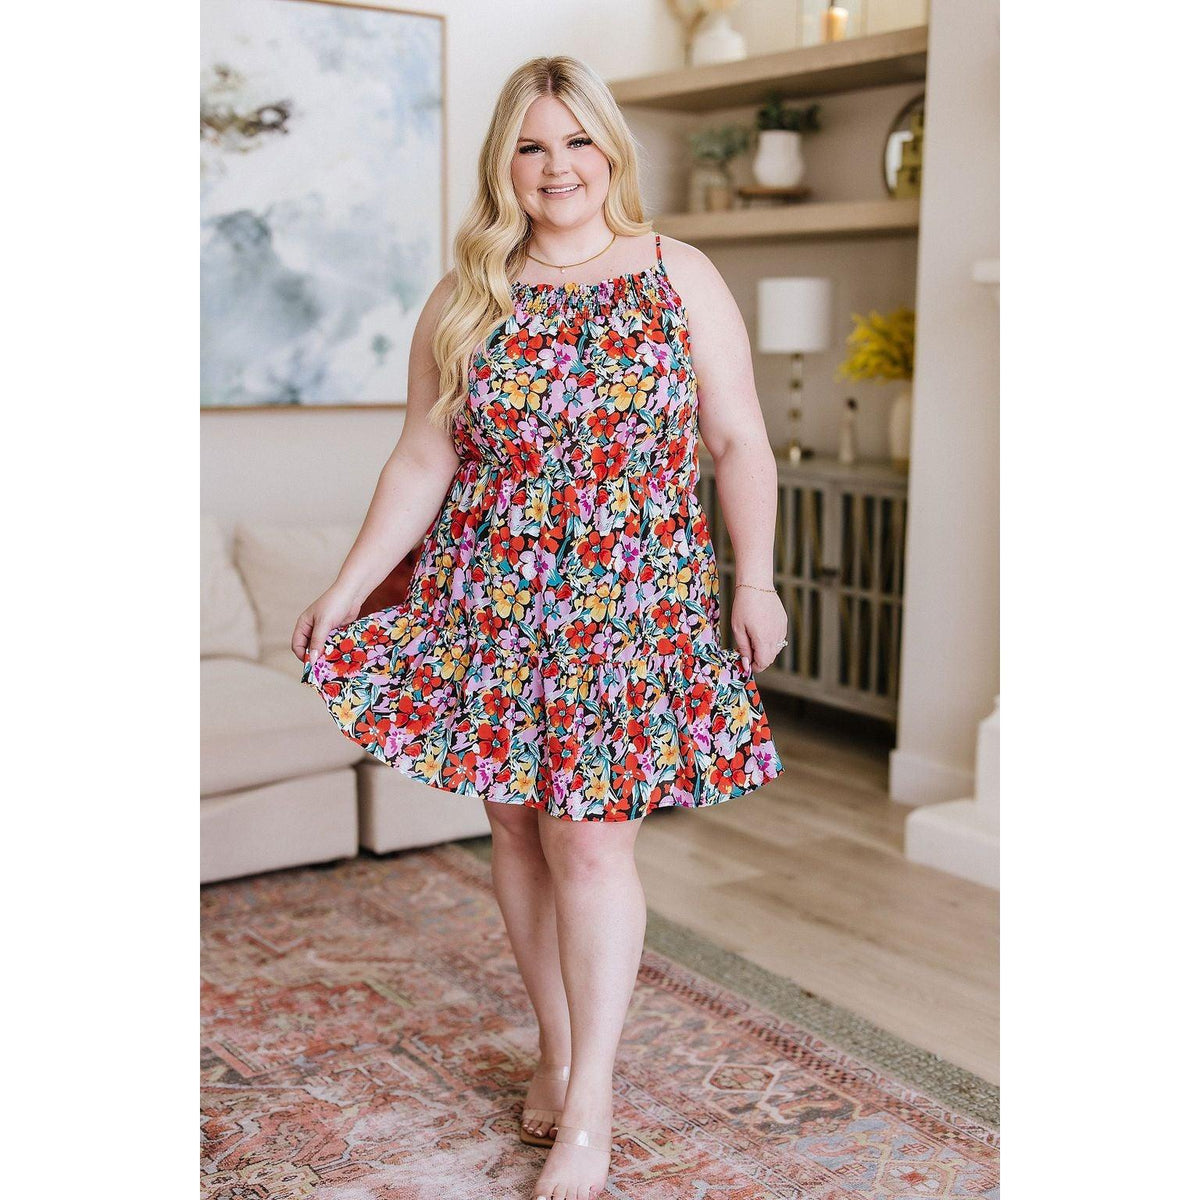 My Side of the Story Floral Dress - becauseofadi